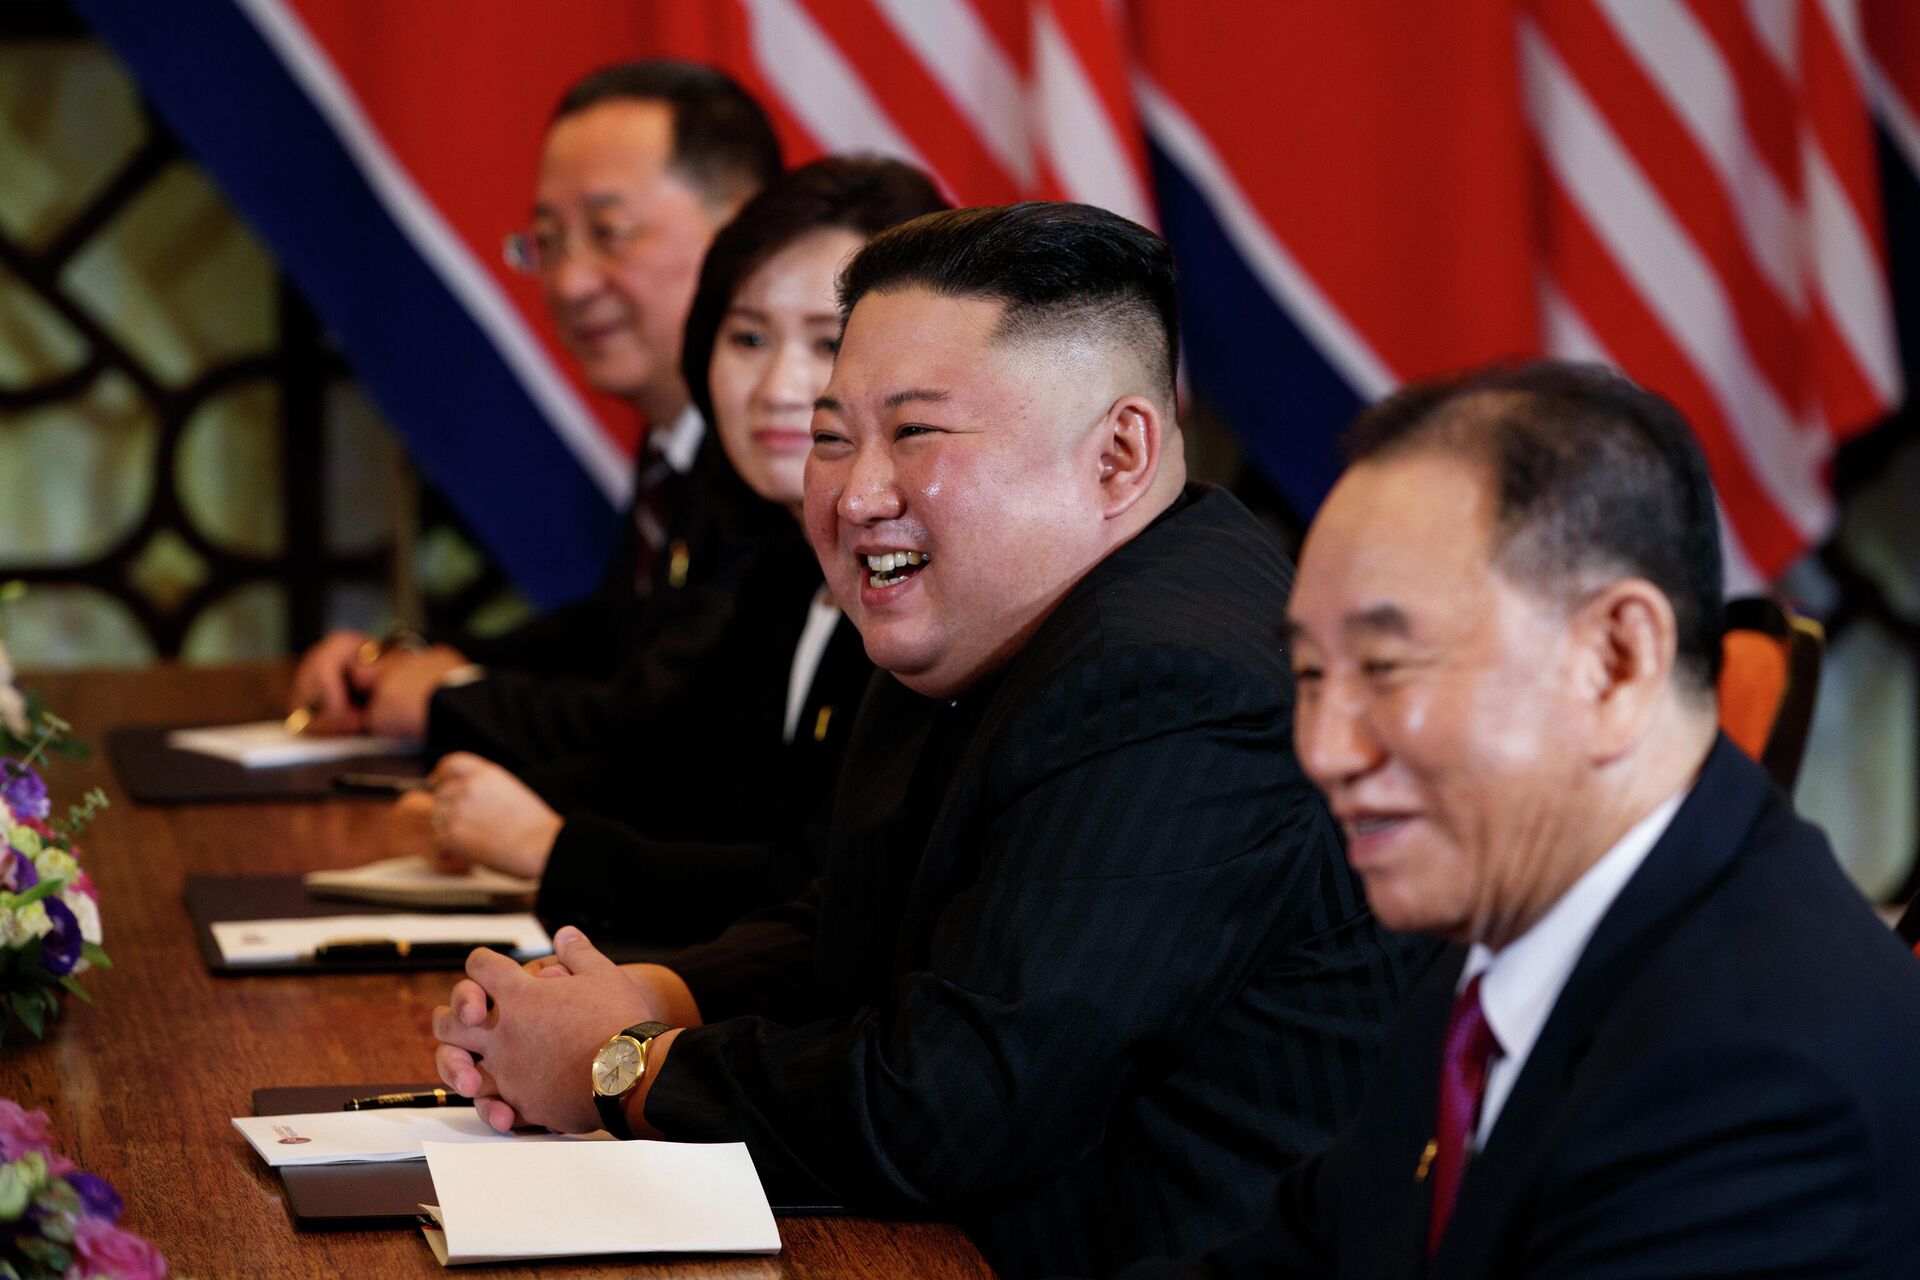 In this Feb. 28, 2019, file photo, North Korean leader Kim Jong Un smiles during a meeting with President Donald Trump, Thursday, Feb. 28, 2019, in Hanoi. at right is Kim Yong Chol, a North Korean senior ruling party official and former intelligence chief.  - Sputnik International, 1920, 29.10.2021